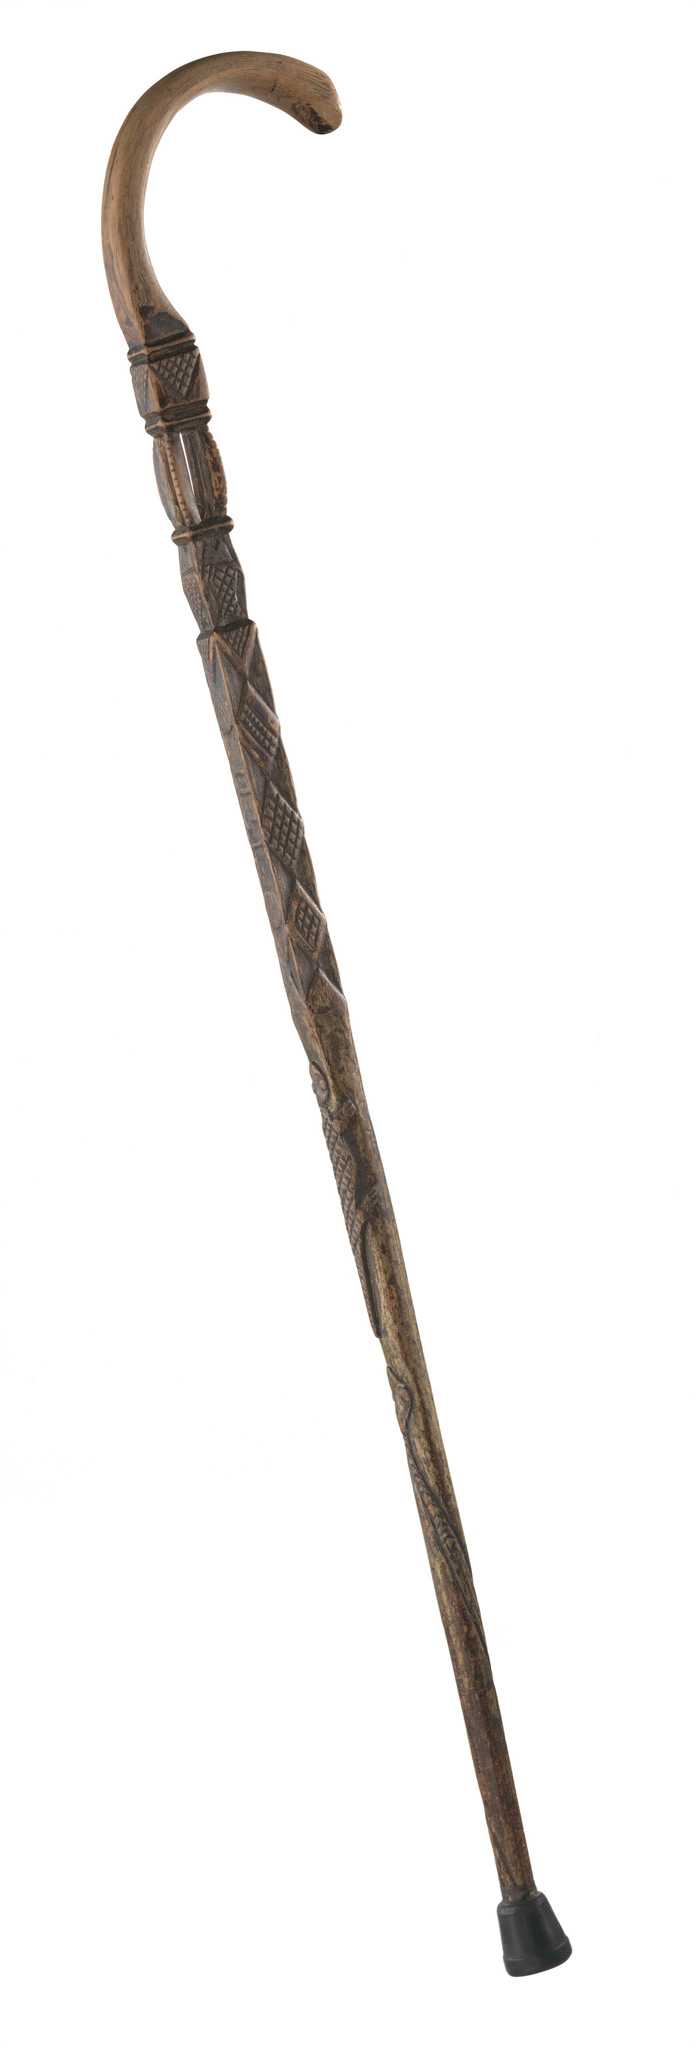 A carved wooden walking cane owned by Sen. W.B. Nash. The length of the cane is cylindrical at the bottom but squared off about halfway up. The cane has been incised over much of its surface with geometric and animal decorations, including diamonds, fish, snake and lizard. [19  11] is carved on the outward facing side of the cane. Near the head of the cane is a carved chamber with four curved posts inside which rolls a loose wooden ball. The top of the cane is curved, pale and very smooth from use. At the handle of the cane handle is another incised section, a geometric design or possibly letters. There is a black rubber piece, not original, adhered to the foot of the cane.